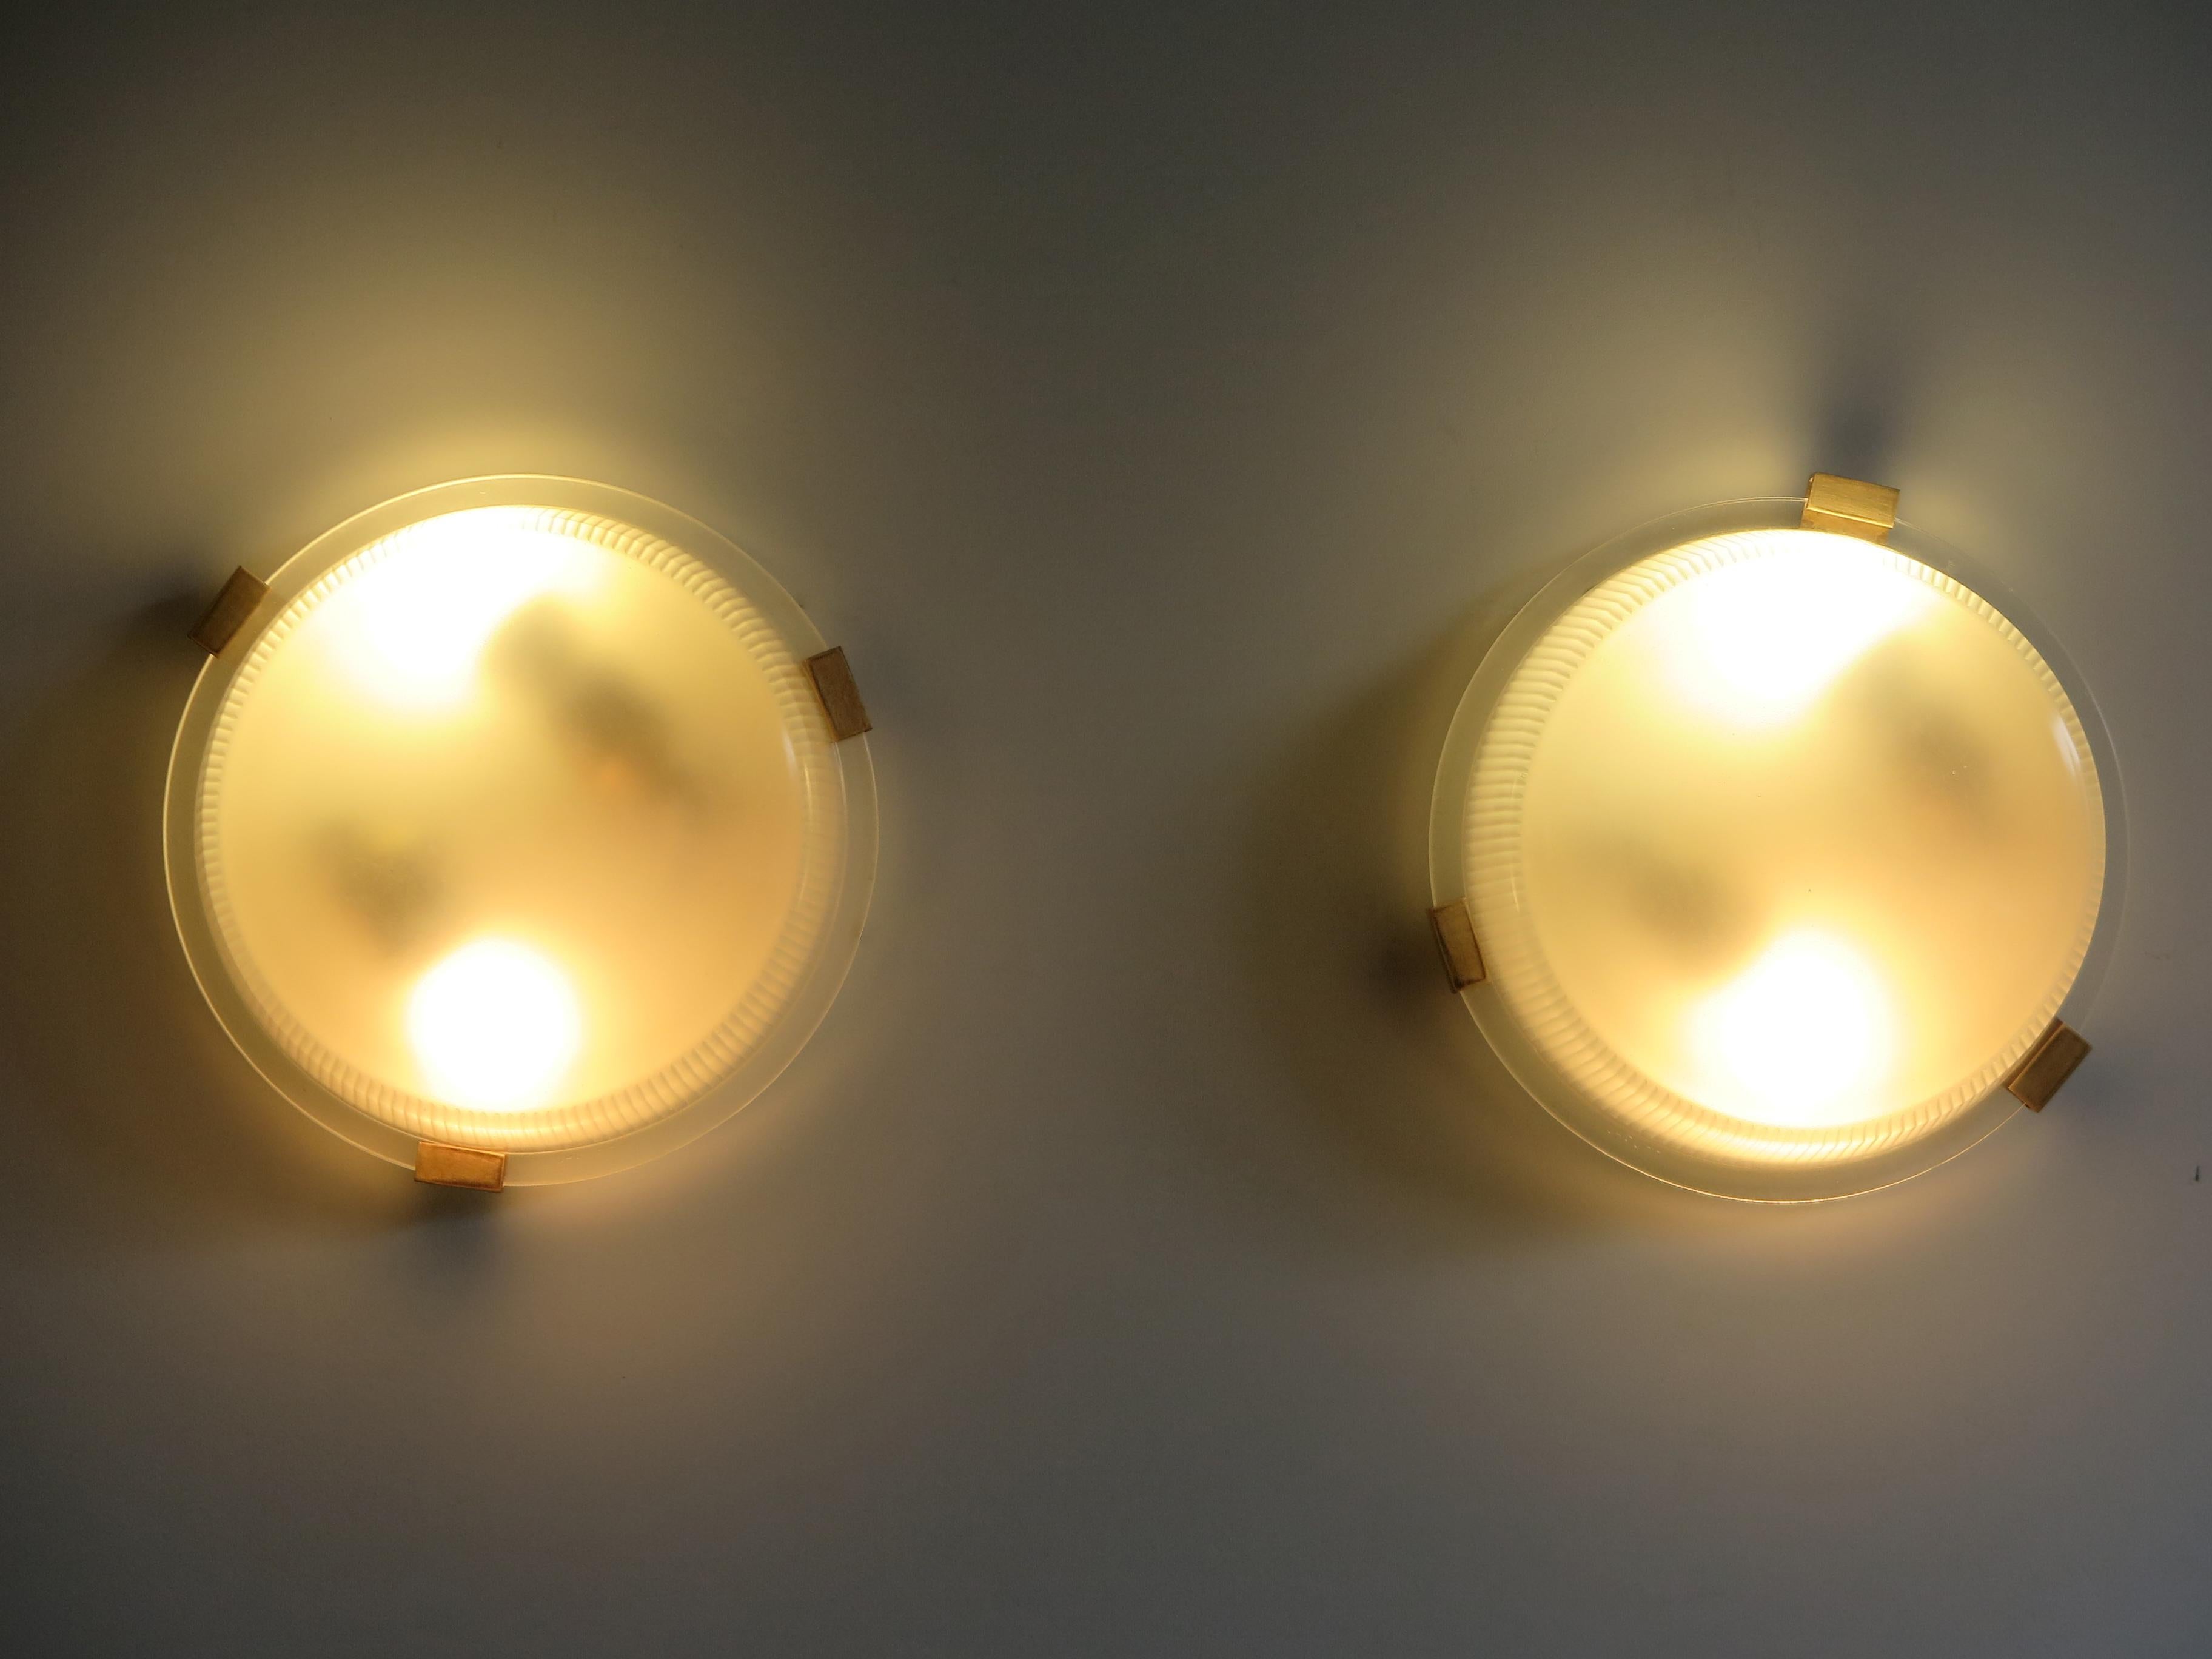 Couple of rare Italian sconces or ceiling lamps designed by famous designer Ignazio Gardella for Azucena, brass structure and diffusers in satin-finish molded glass, manufacturer’s mark engraved under the structure, 1950s.

Please note that the